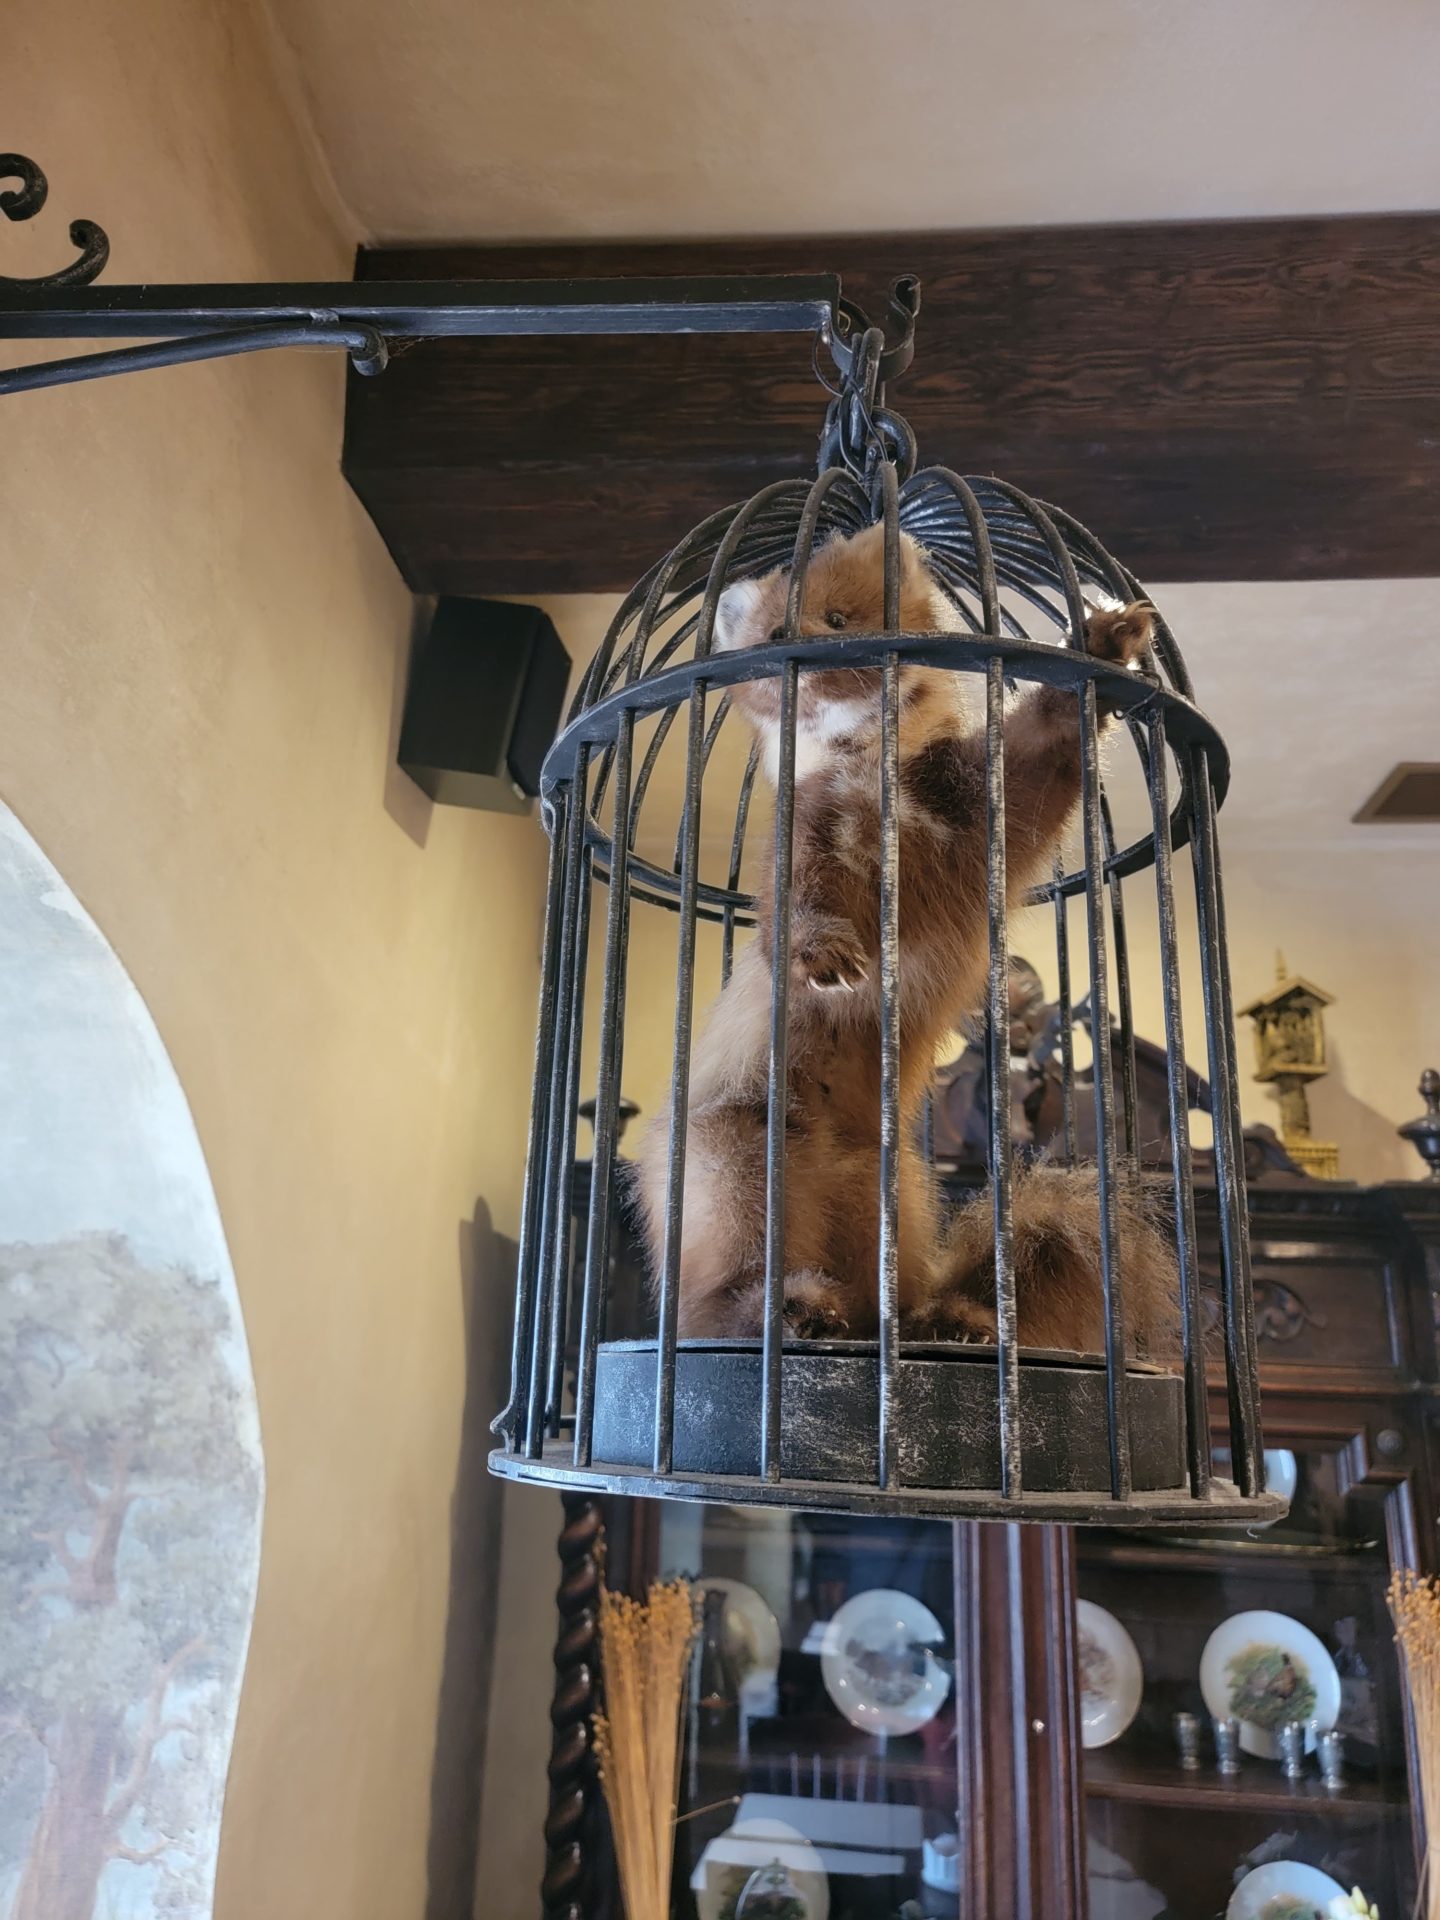 a squirrel in a cage